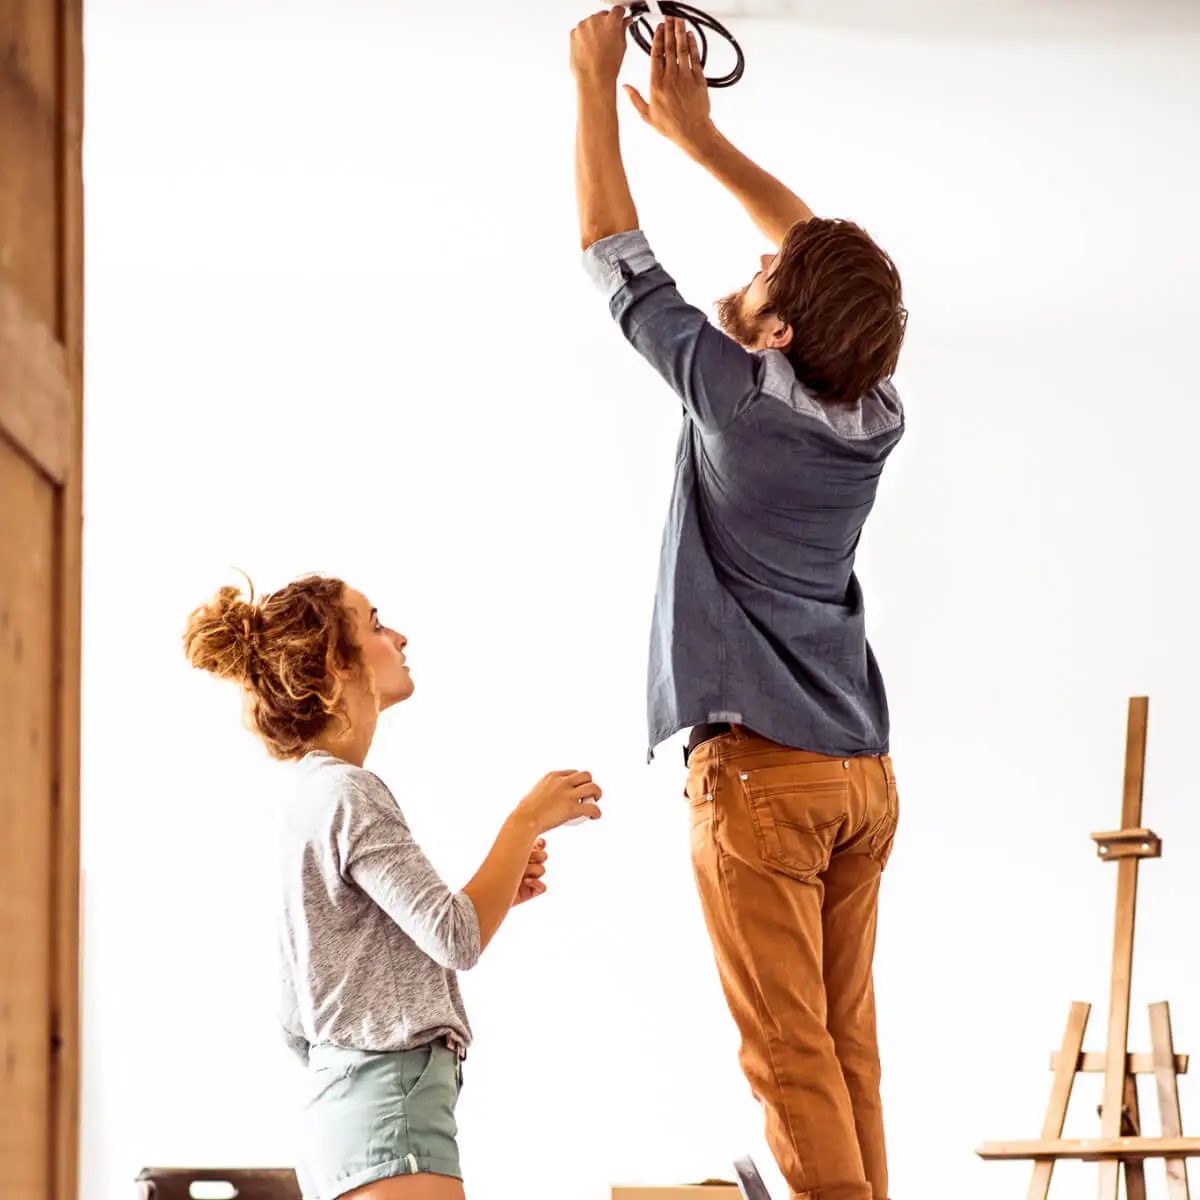 Young man stands on chair reaching up to electrical light wiring. A young woman stands beside him ready to help out.